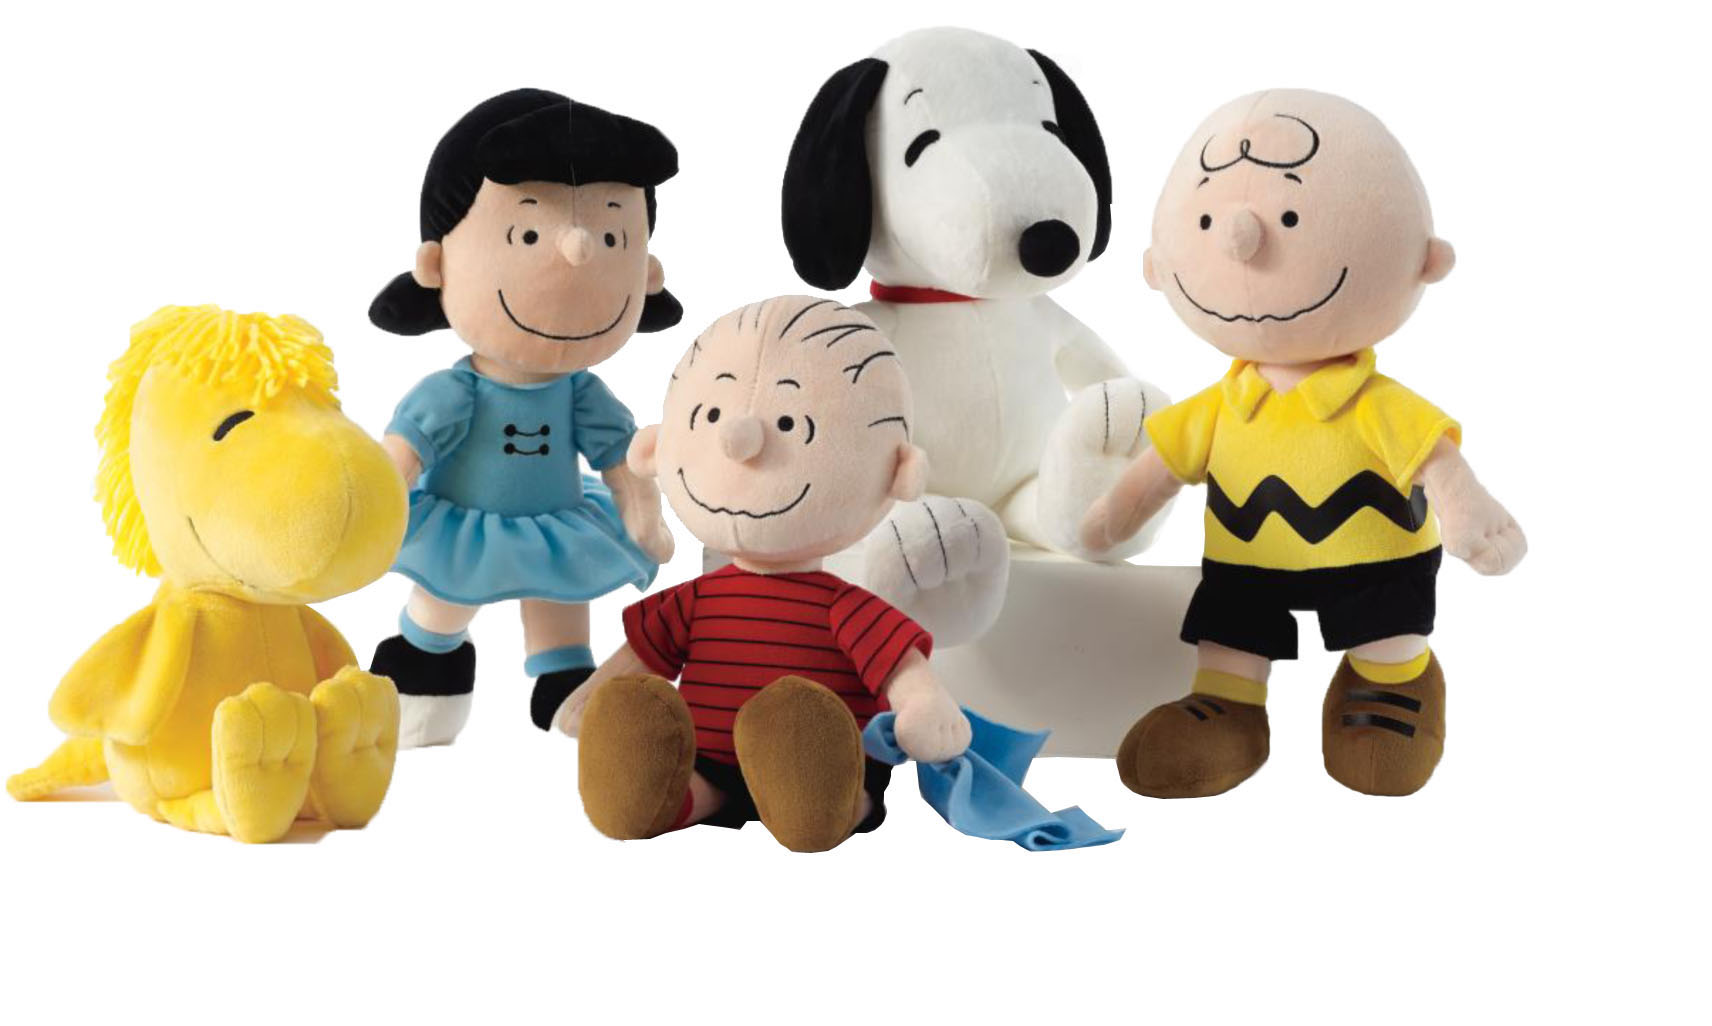 Snuggle up with a Peanuts Plush from Kohl's